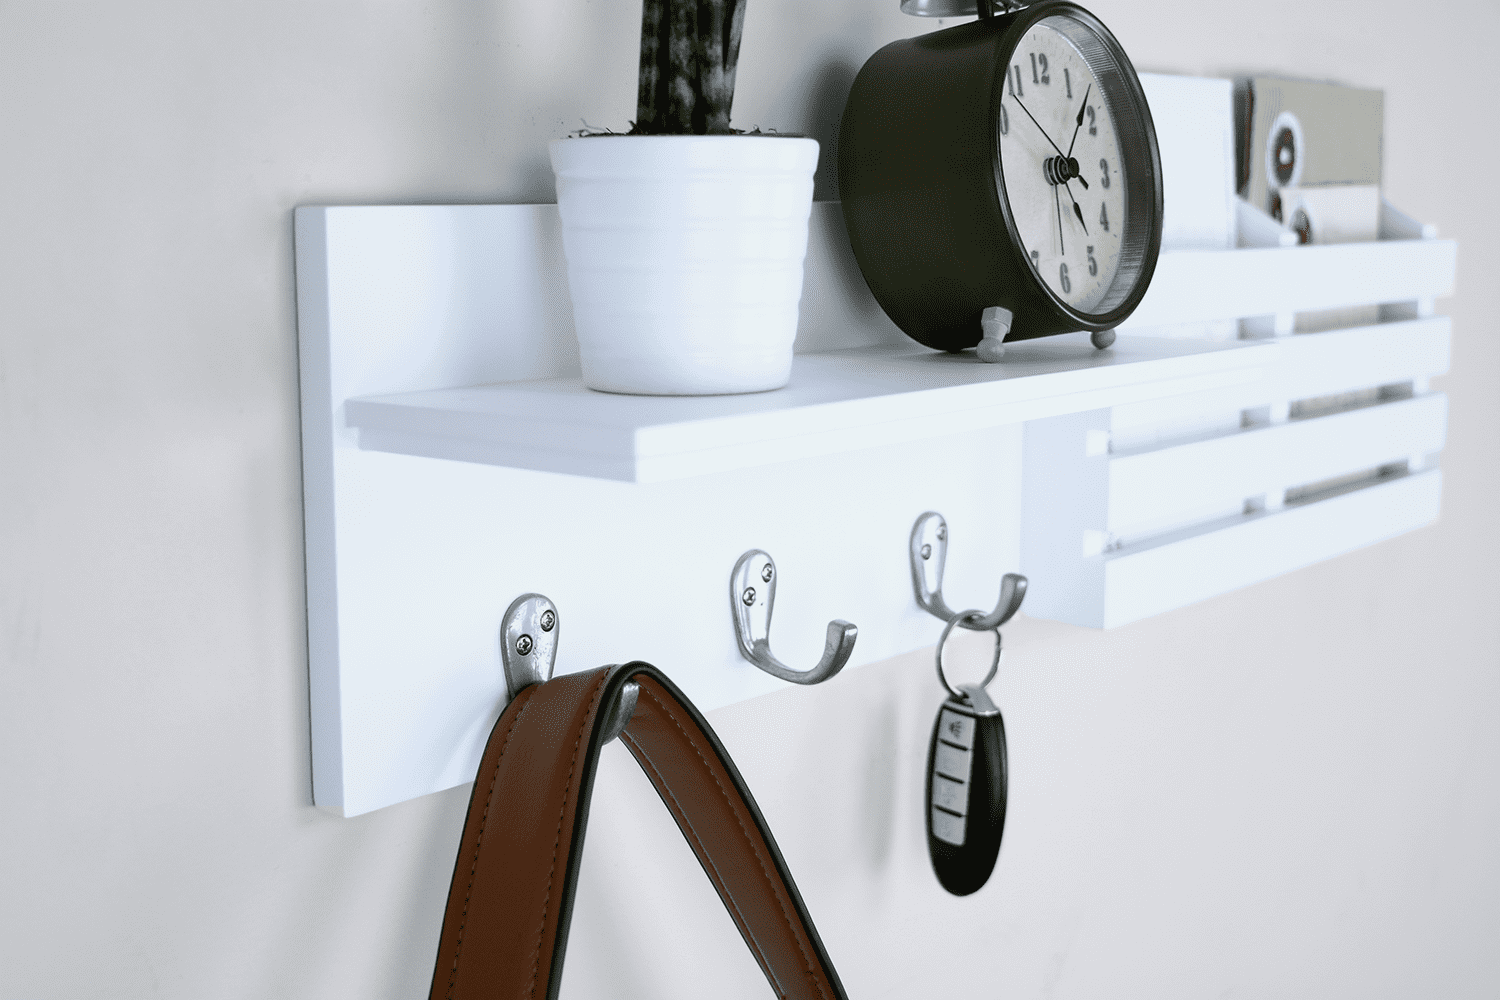  Ballucci Key Holder for Wall Decorative, Mail Organizer Wall  Mount Sorter Rack with 3 Key Hooks for Wall, Entryway Shelf Mail Holder Key  Rack, Home Decor for Entrance Kitchen, White 